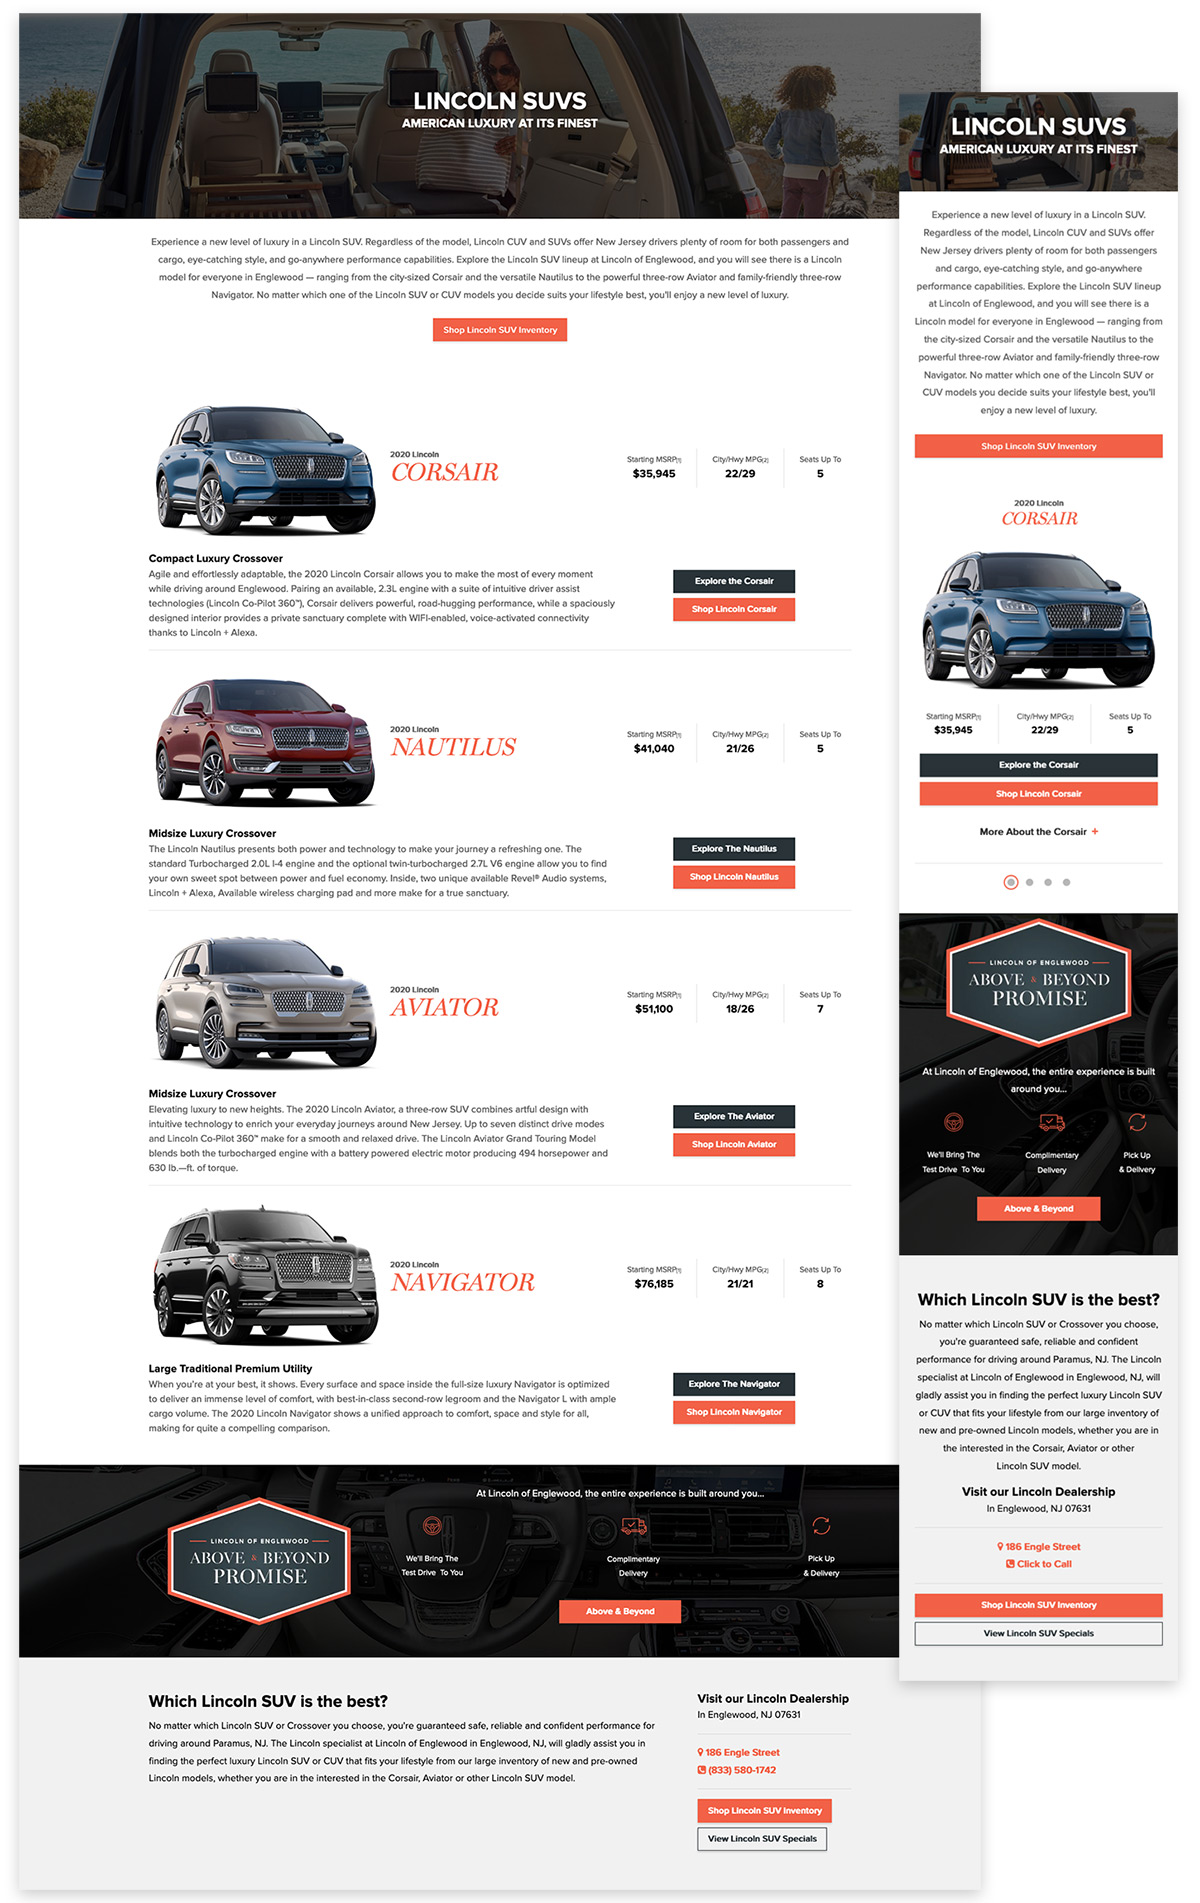 Full SUV Model Comparison page layouts on desktop and mobile